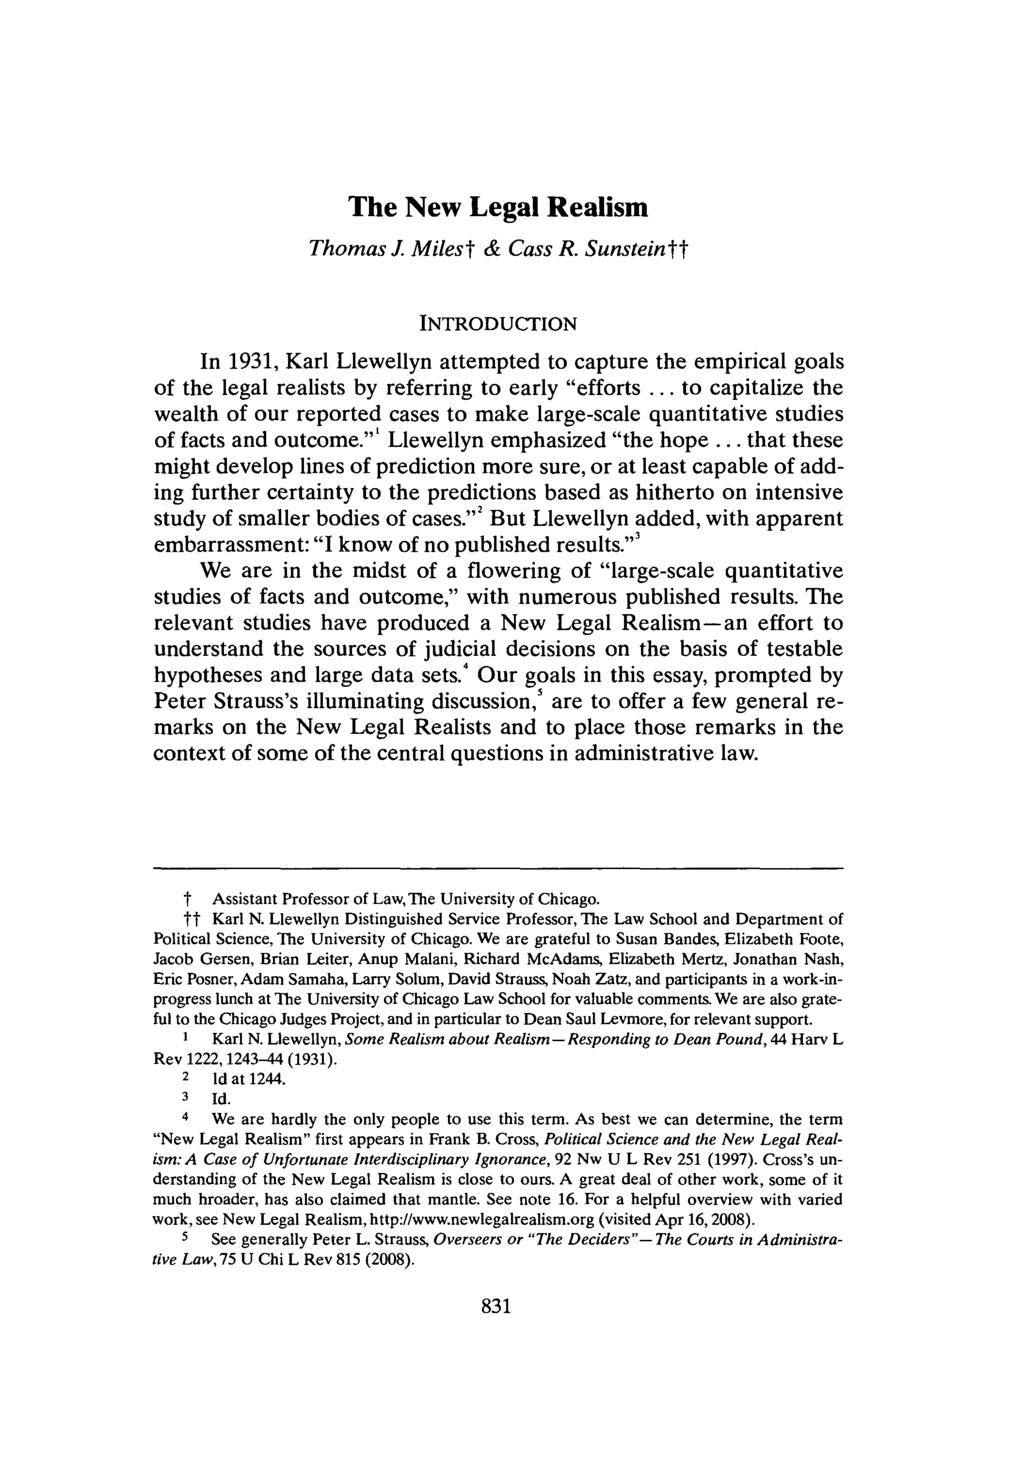 The New Legal Realism Thomas J. Milest & Cass R. Sunsteintt INTRODUCTION In 1931, Karl Llewellyn attempted to capture the empirical goals of the legal realists by referring to early "efforts.